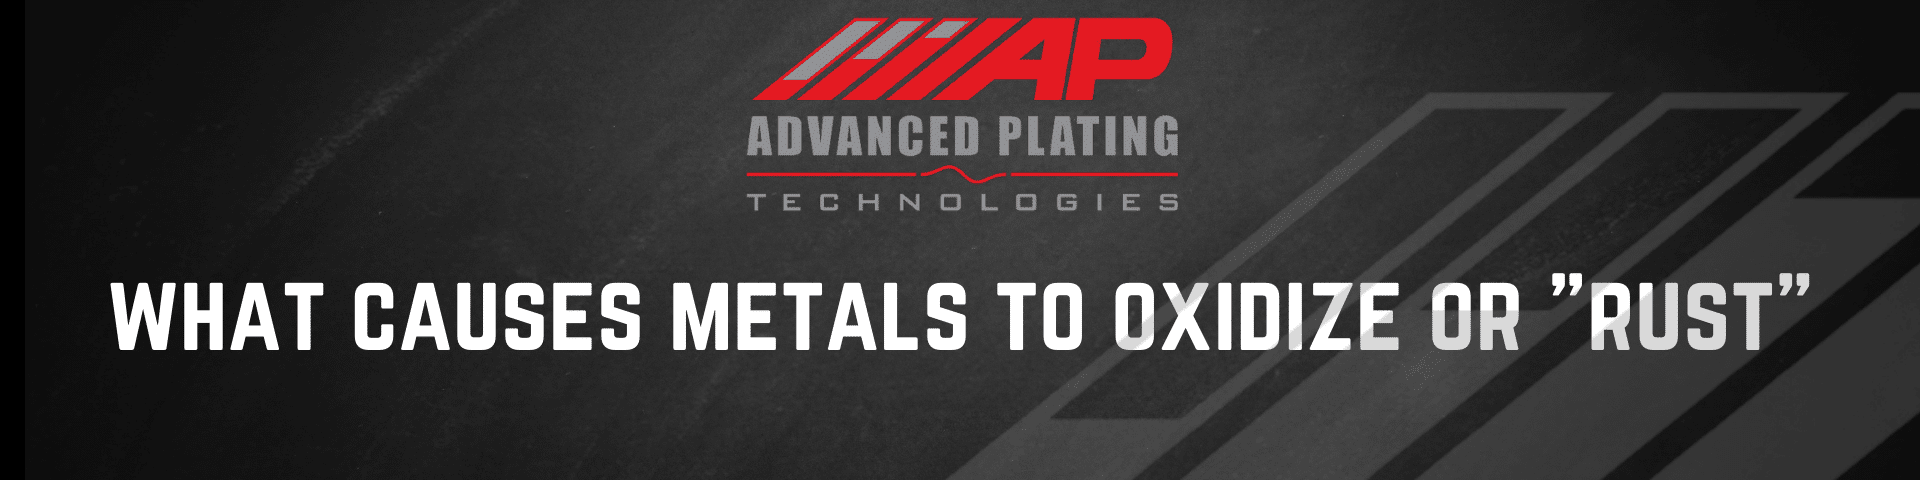 What causes metals to oxidize or "rust"?